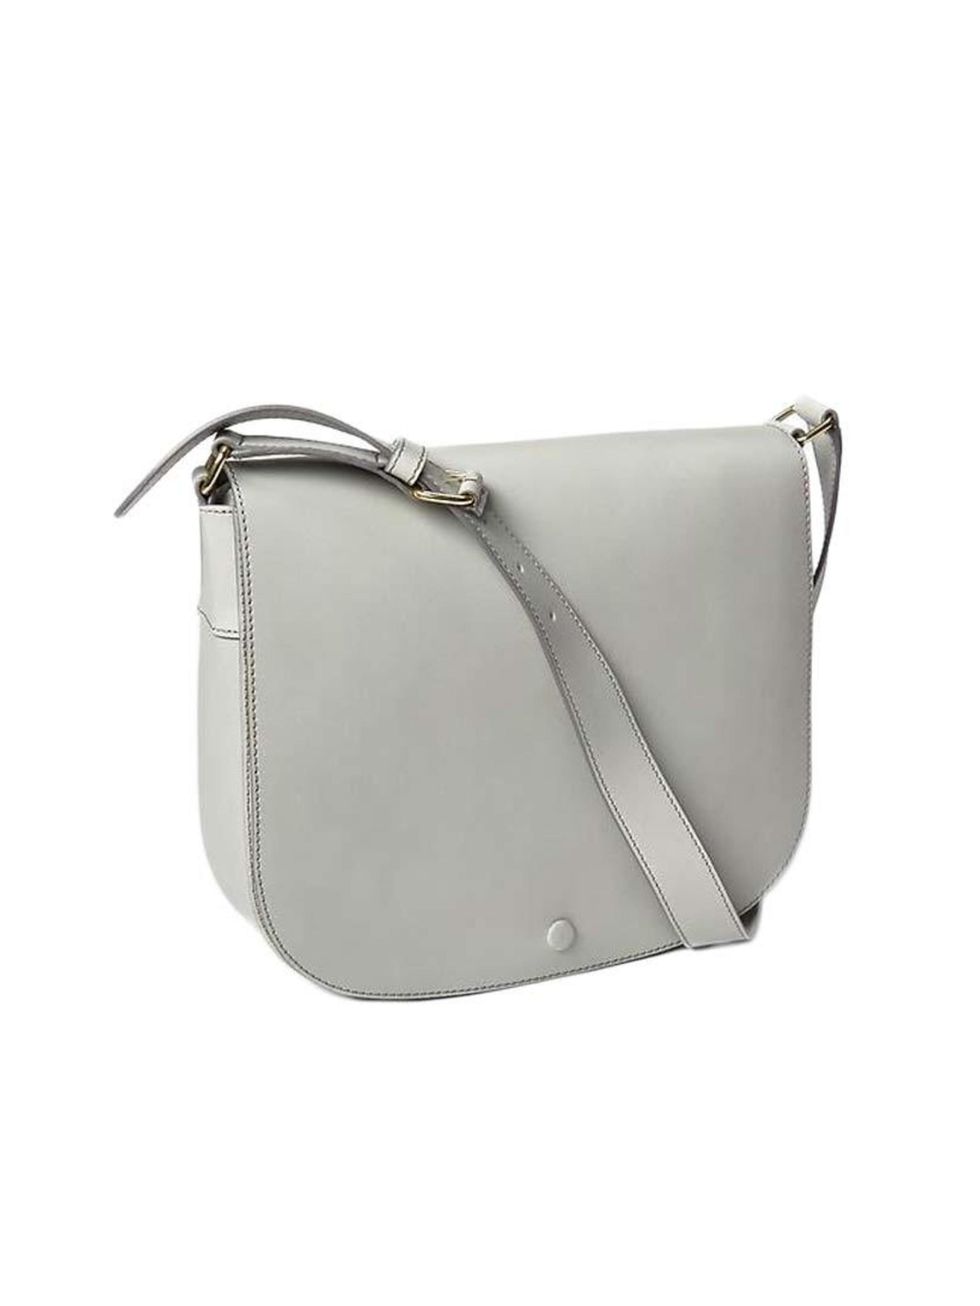 <p>Trust Accessories Editor <a href="http://www.elleuk.com/street-style/what-elle-wears/donna-wallace-what-elle-wears-year-wardrobe-accessories-editor-2014">Donna Wallace</a> to go for a bag...</p>

<p><a href="http://www.gap.co.uk/browse/product.do?cid=1